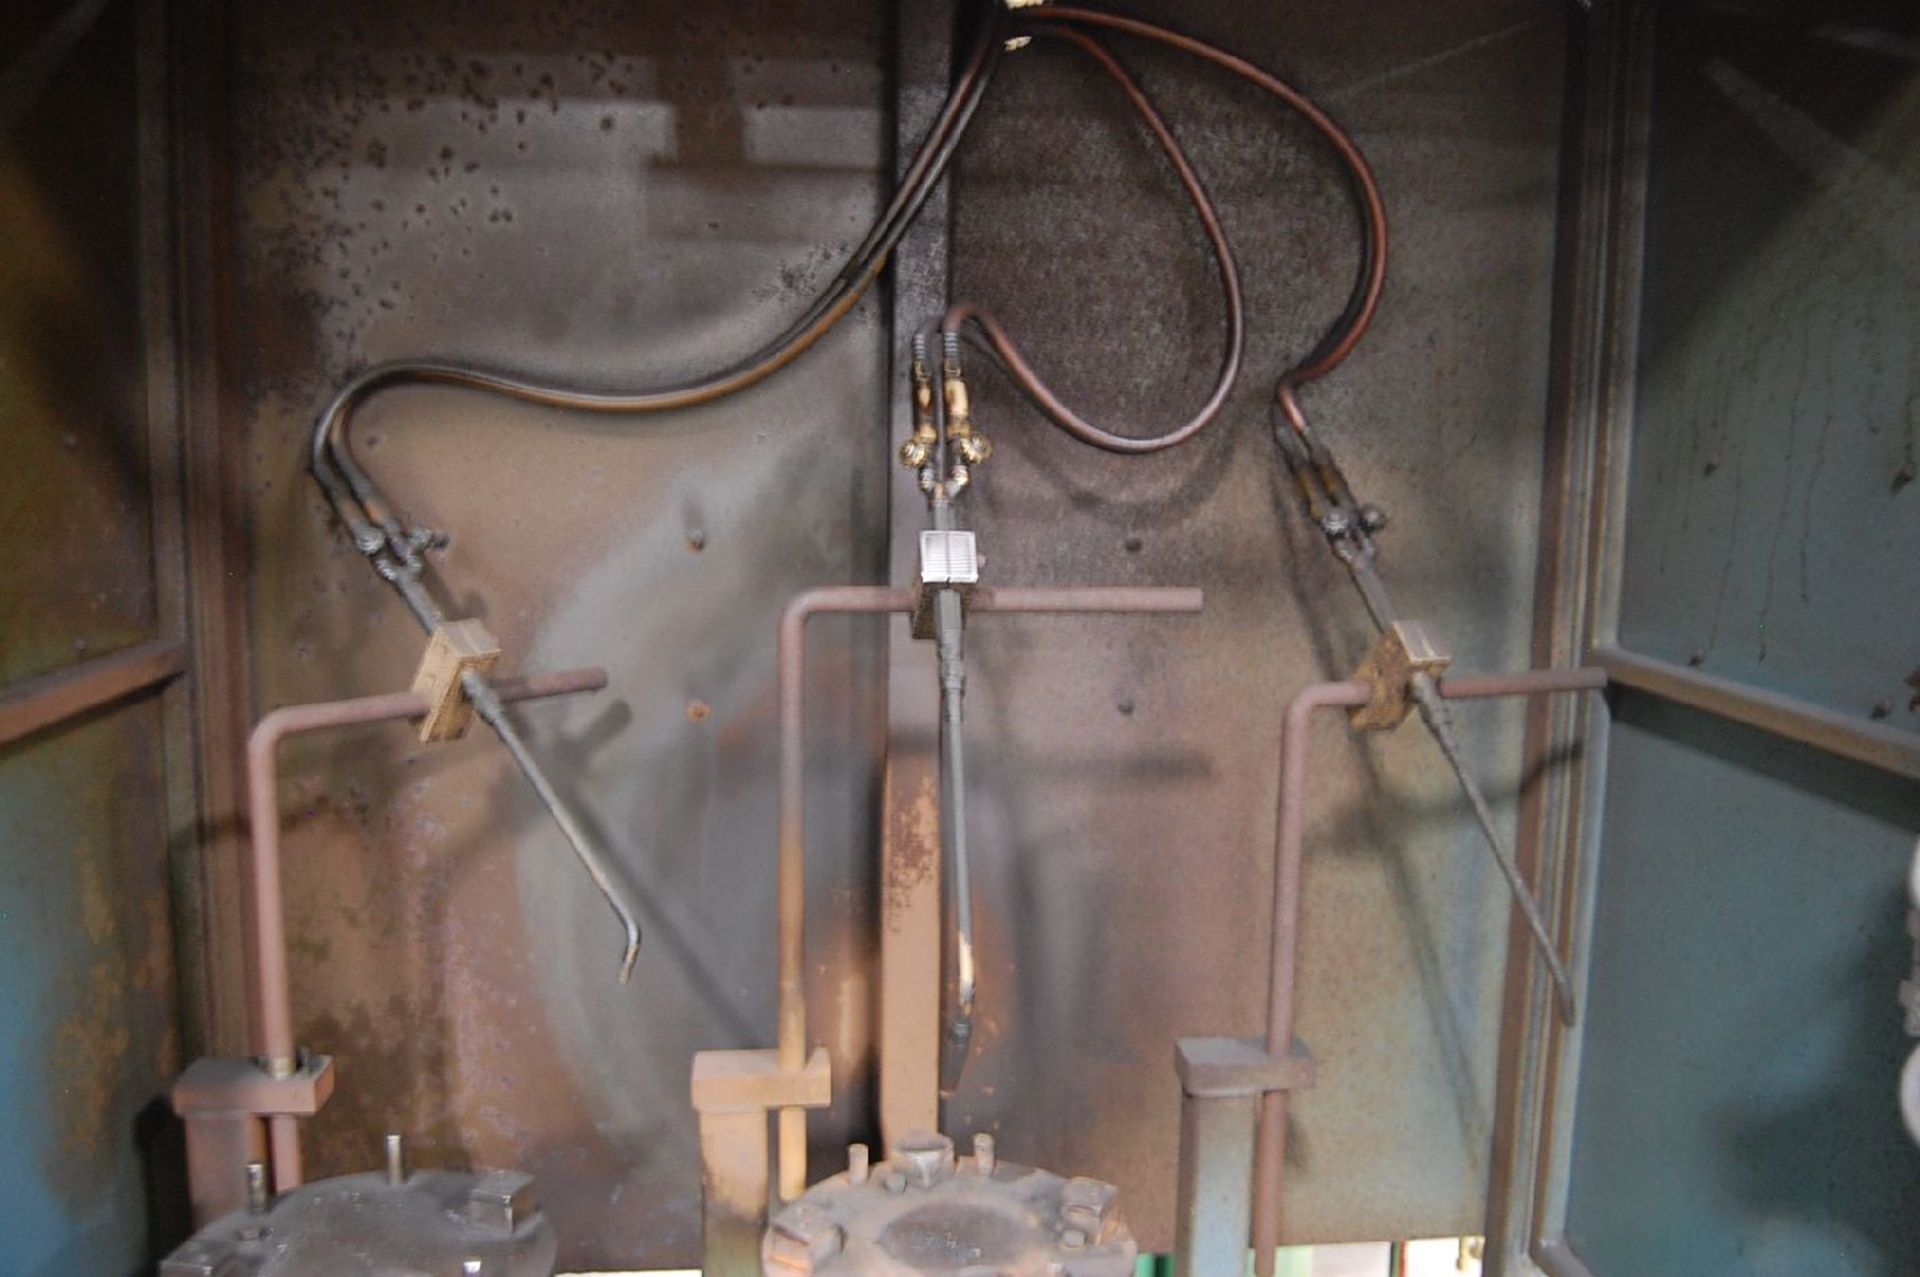 Bancroft 3-Station Pre-Heat Welding Cell - Image 3 of 3